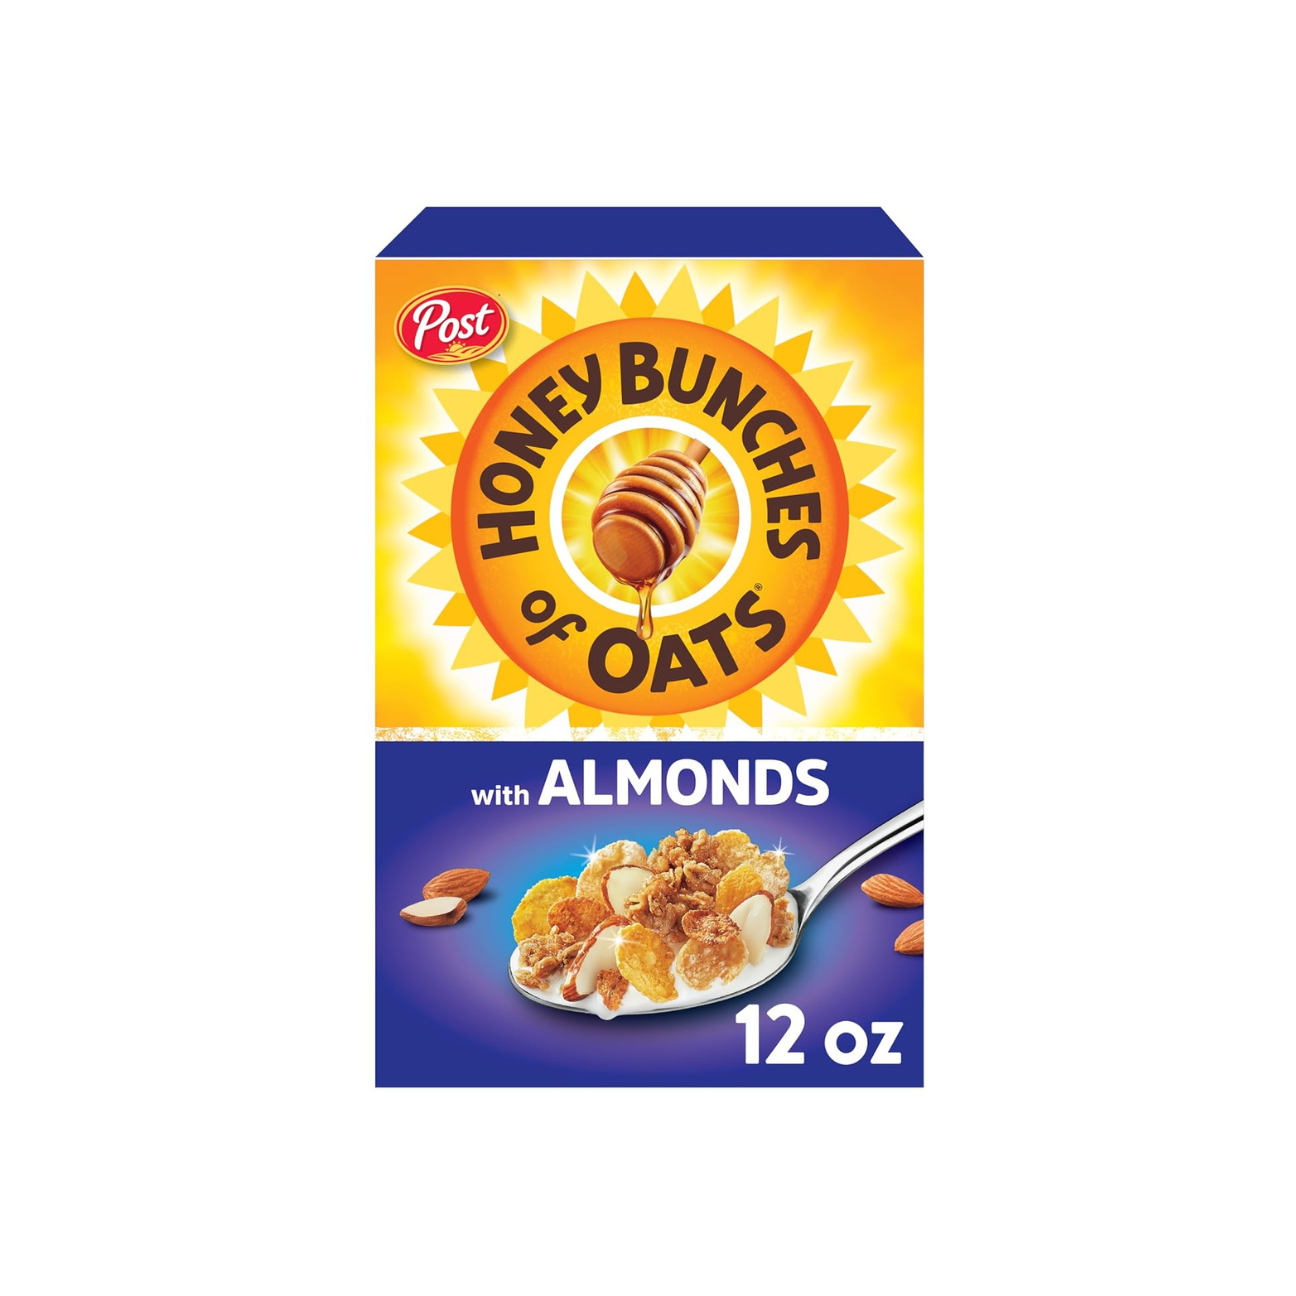 Honey Bunches of Oats with Almonds Breakfast Cereal, 12 Oz Box